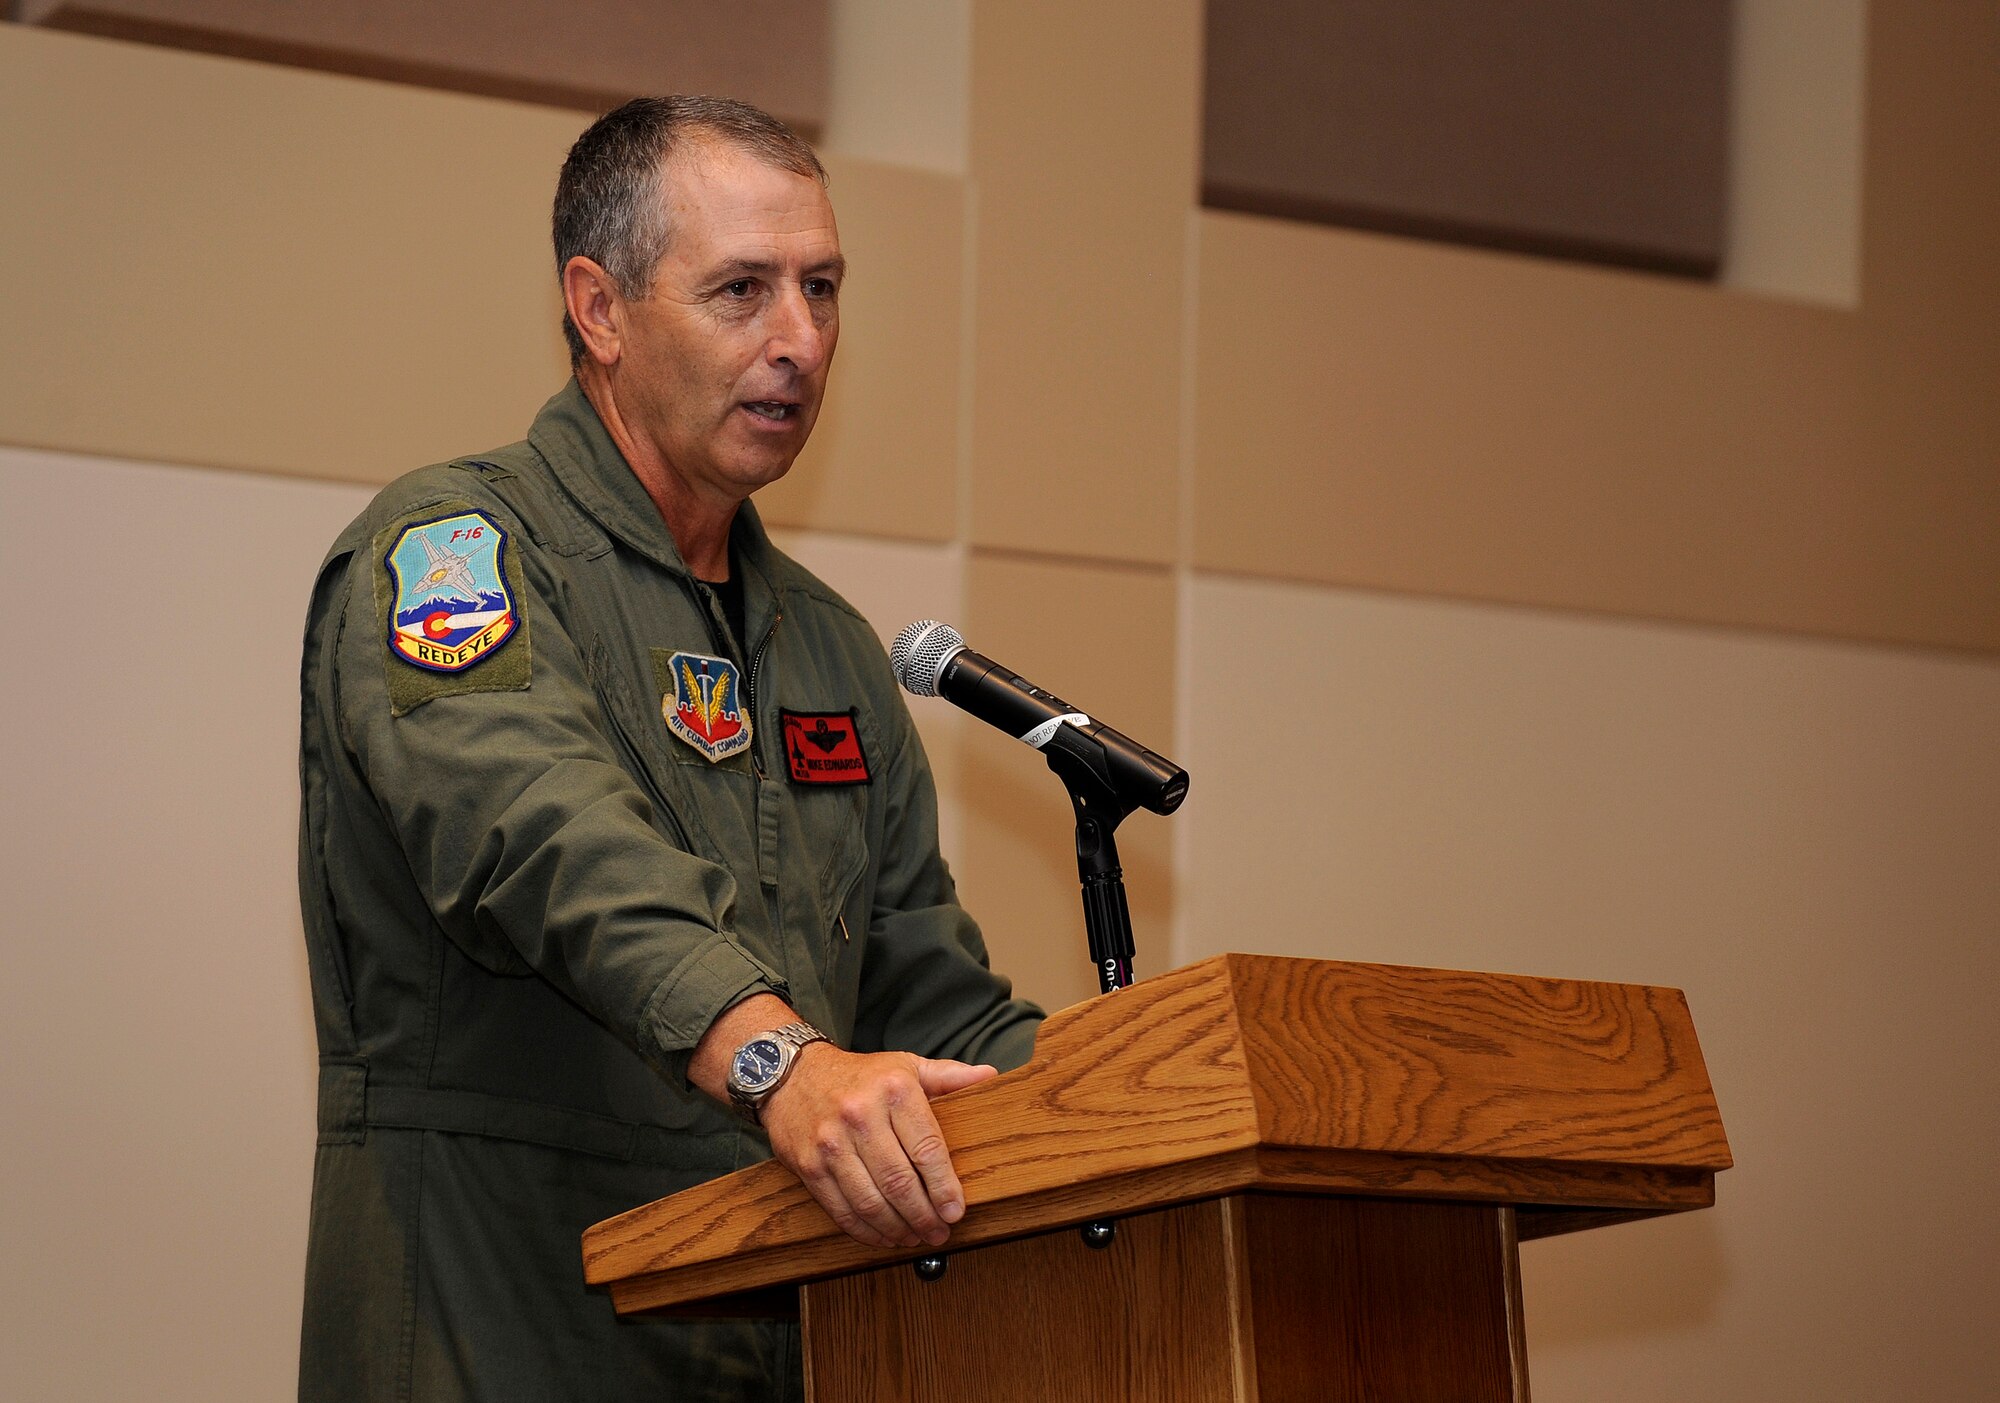 BUCKLEY AIR FORCE BASE, Colo. - Maj. Gen. H. Michael Edwards, Colorado's Adjutant General, gives a speech at Retiree Appreciation Day July 18. General Edwards is also the governor's Executive Director of Military and Veteran Affairs. (U.S. Air Force photo by Senior Airman Steve Czyz)